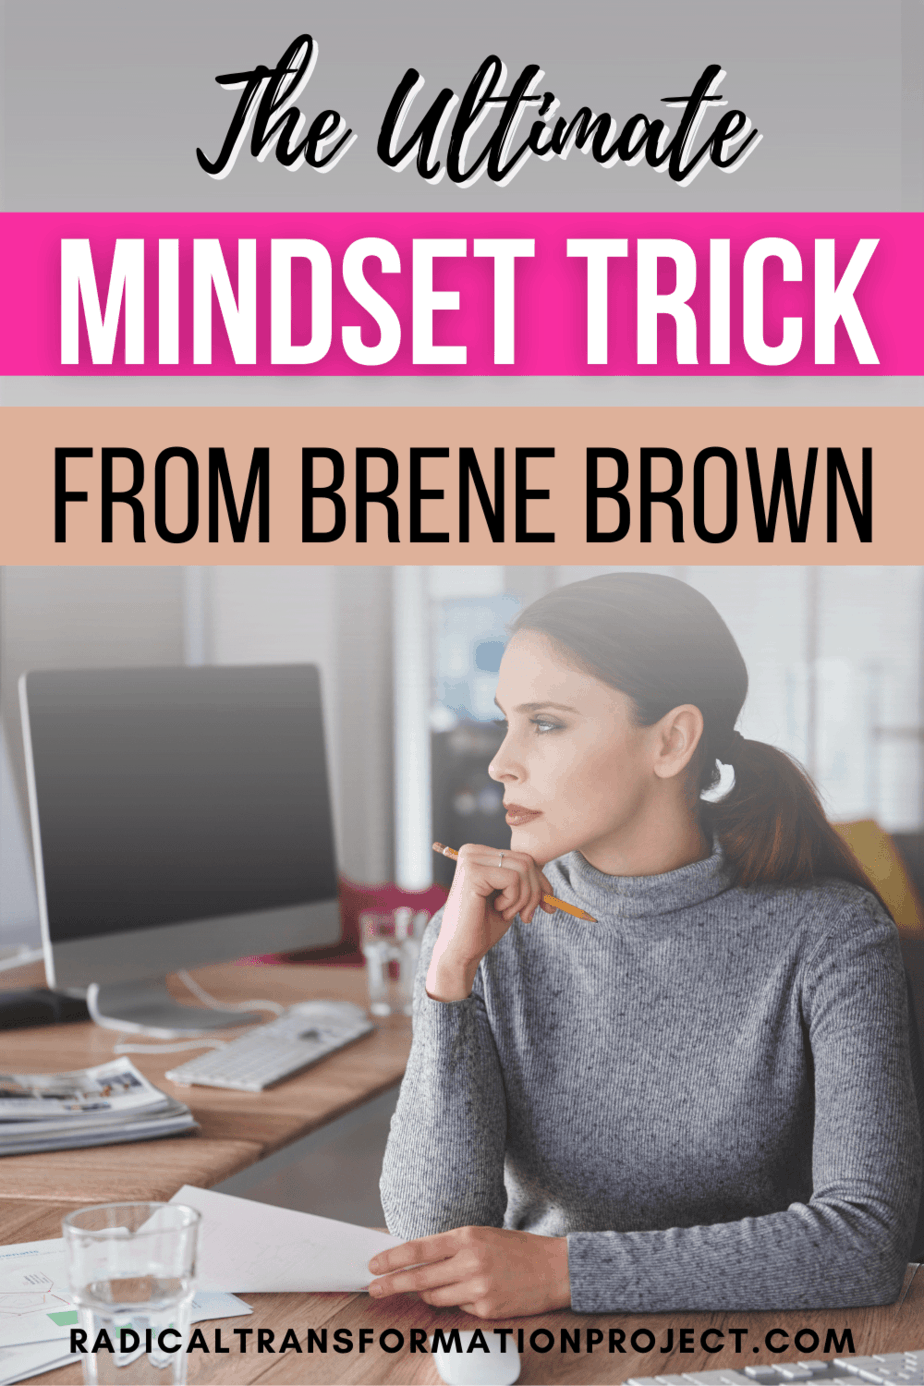 The Ultimate Mindset Shift From Brene Brown